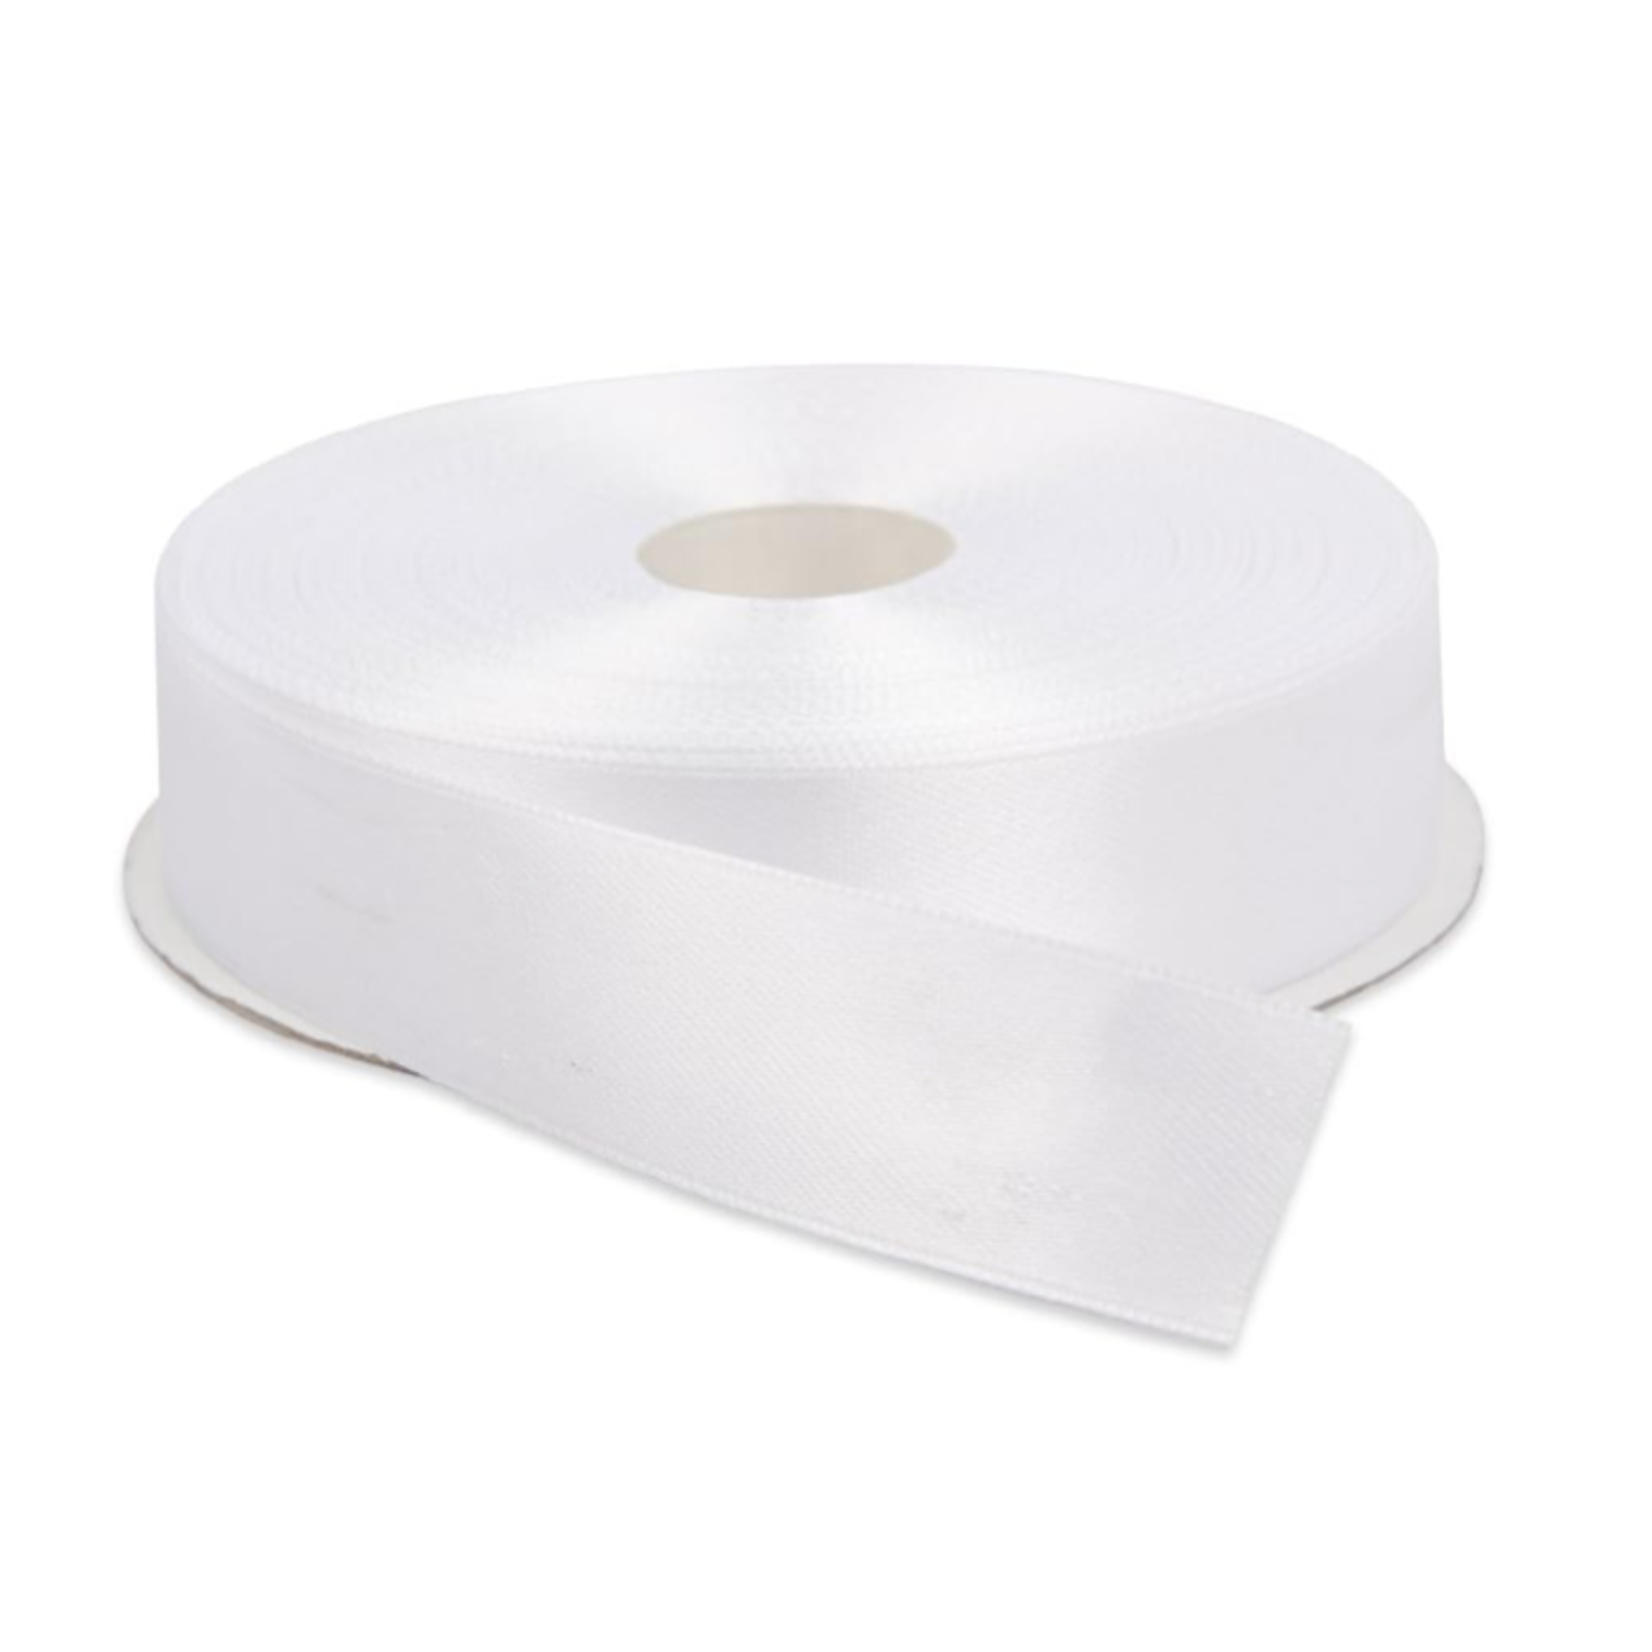 1 1/2" X 50 YDS WHITE DOUBLE FACE RIBBON 50% off was $13.99